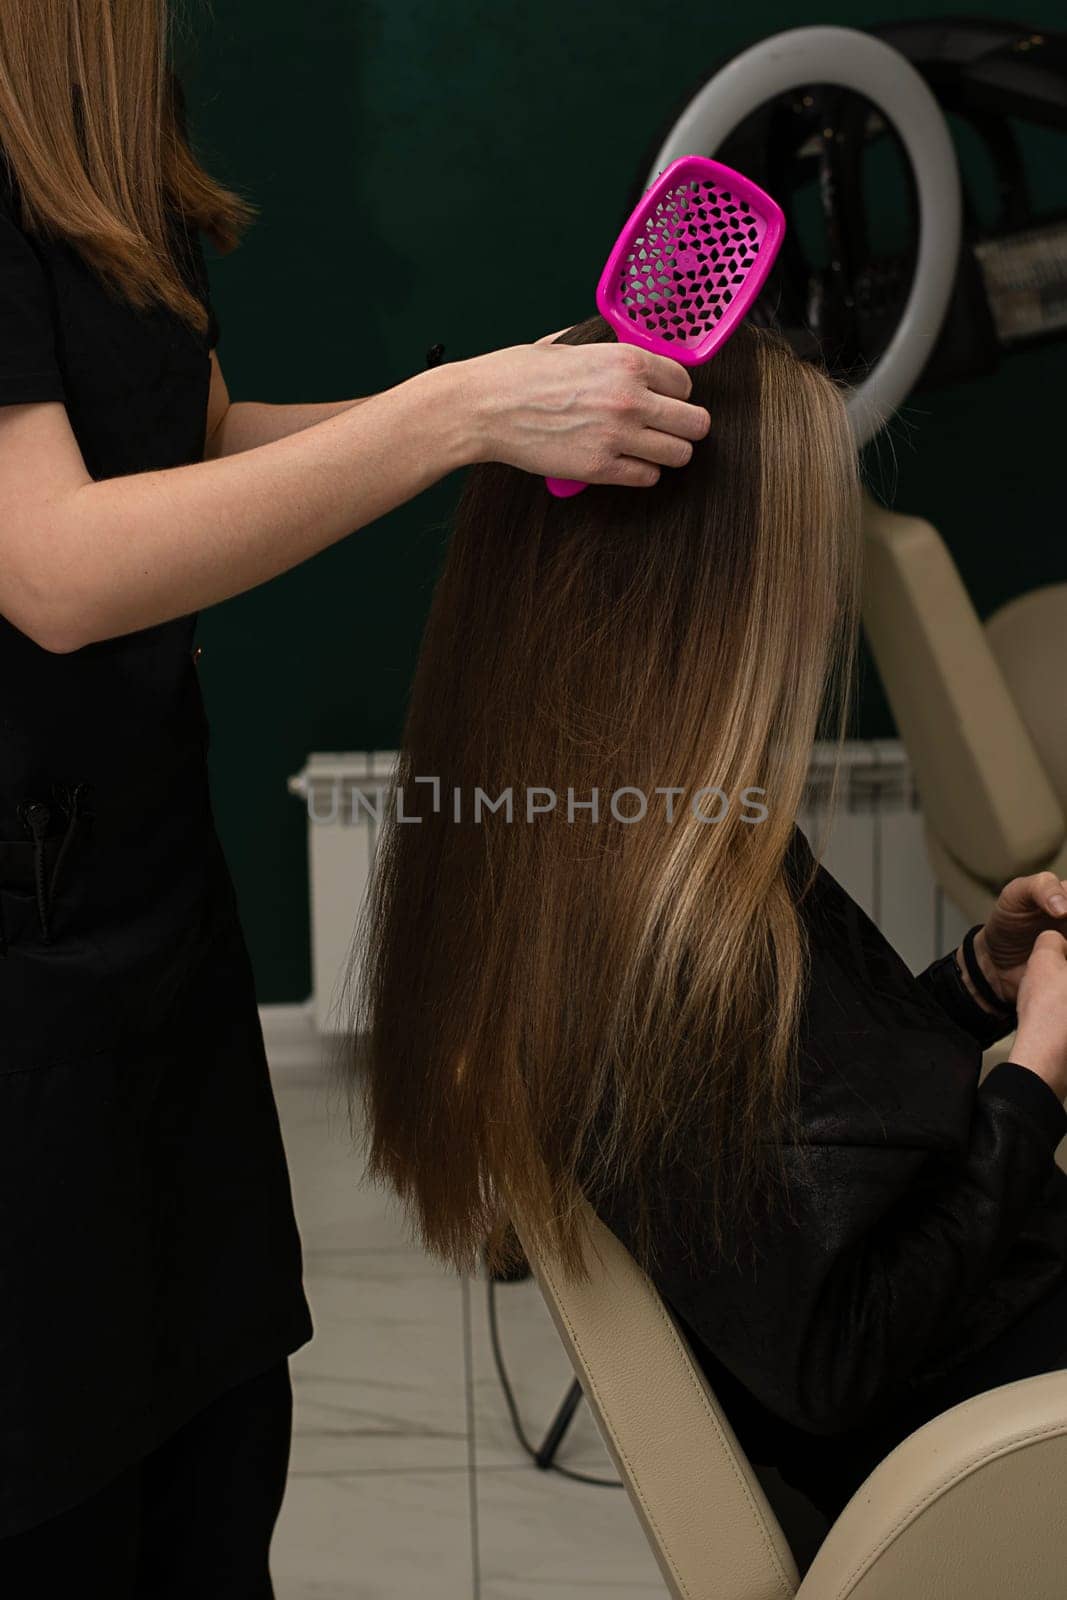 Beauty sphere. The master hairdresser does styling and combing the hair. Combs a client's long hair with a pink comb in a beauty salon. Close-up. Business concept. No faces. by ketlit